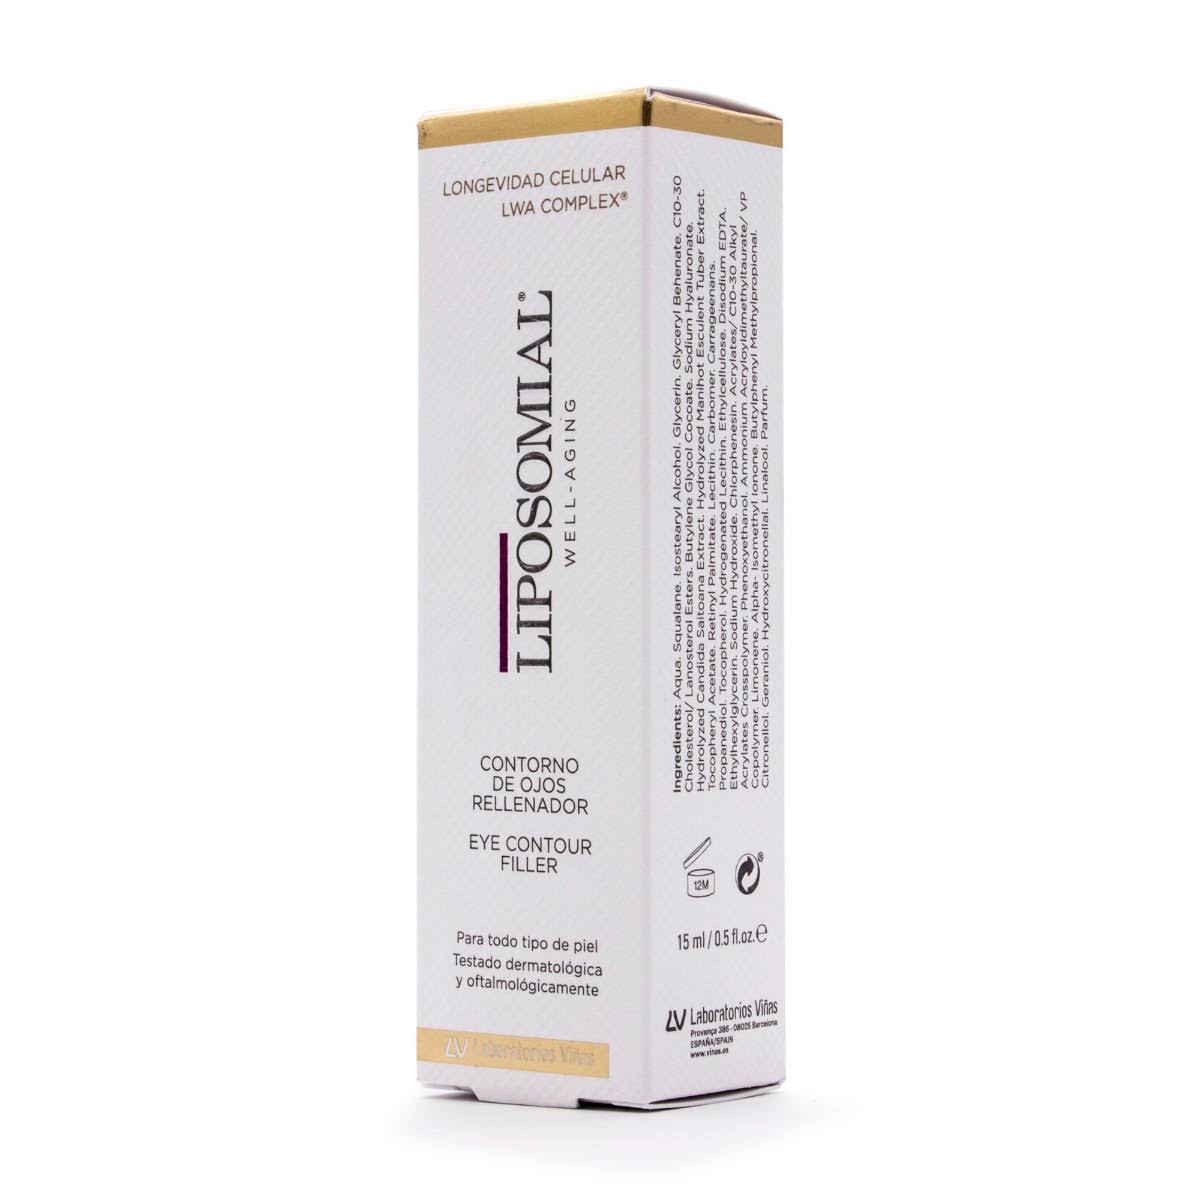 Liposomial Well-Aging Contorno dos olhos 15Ml